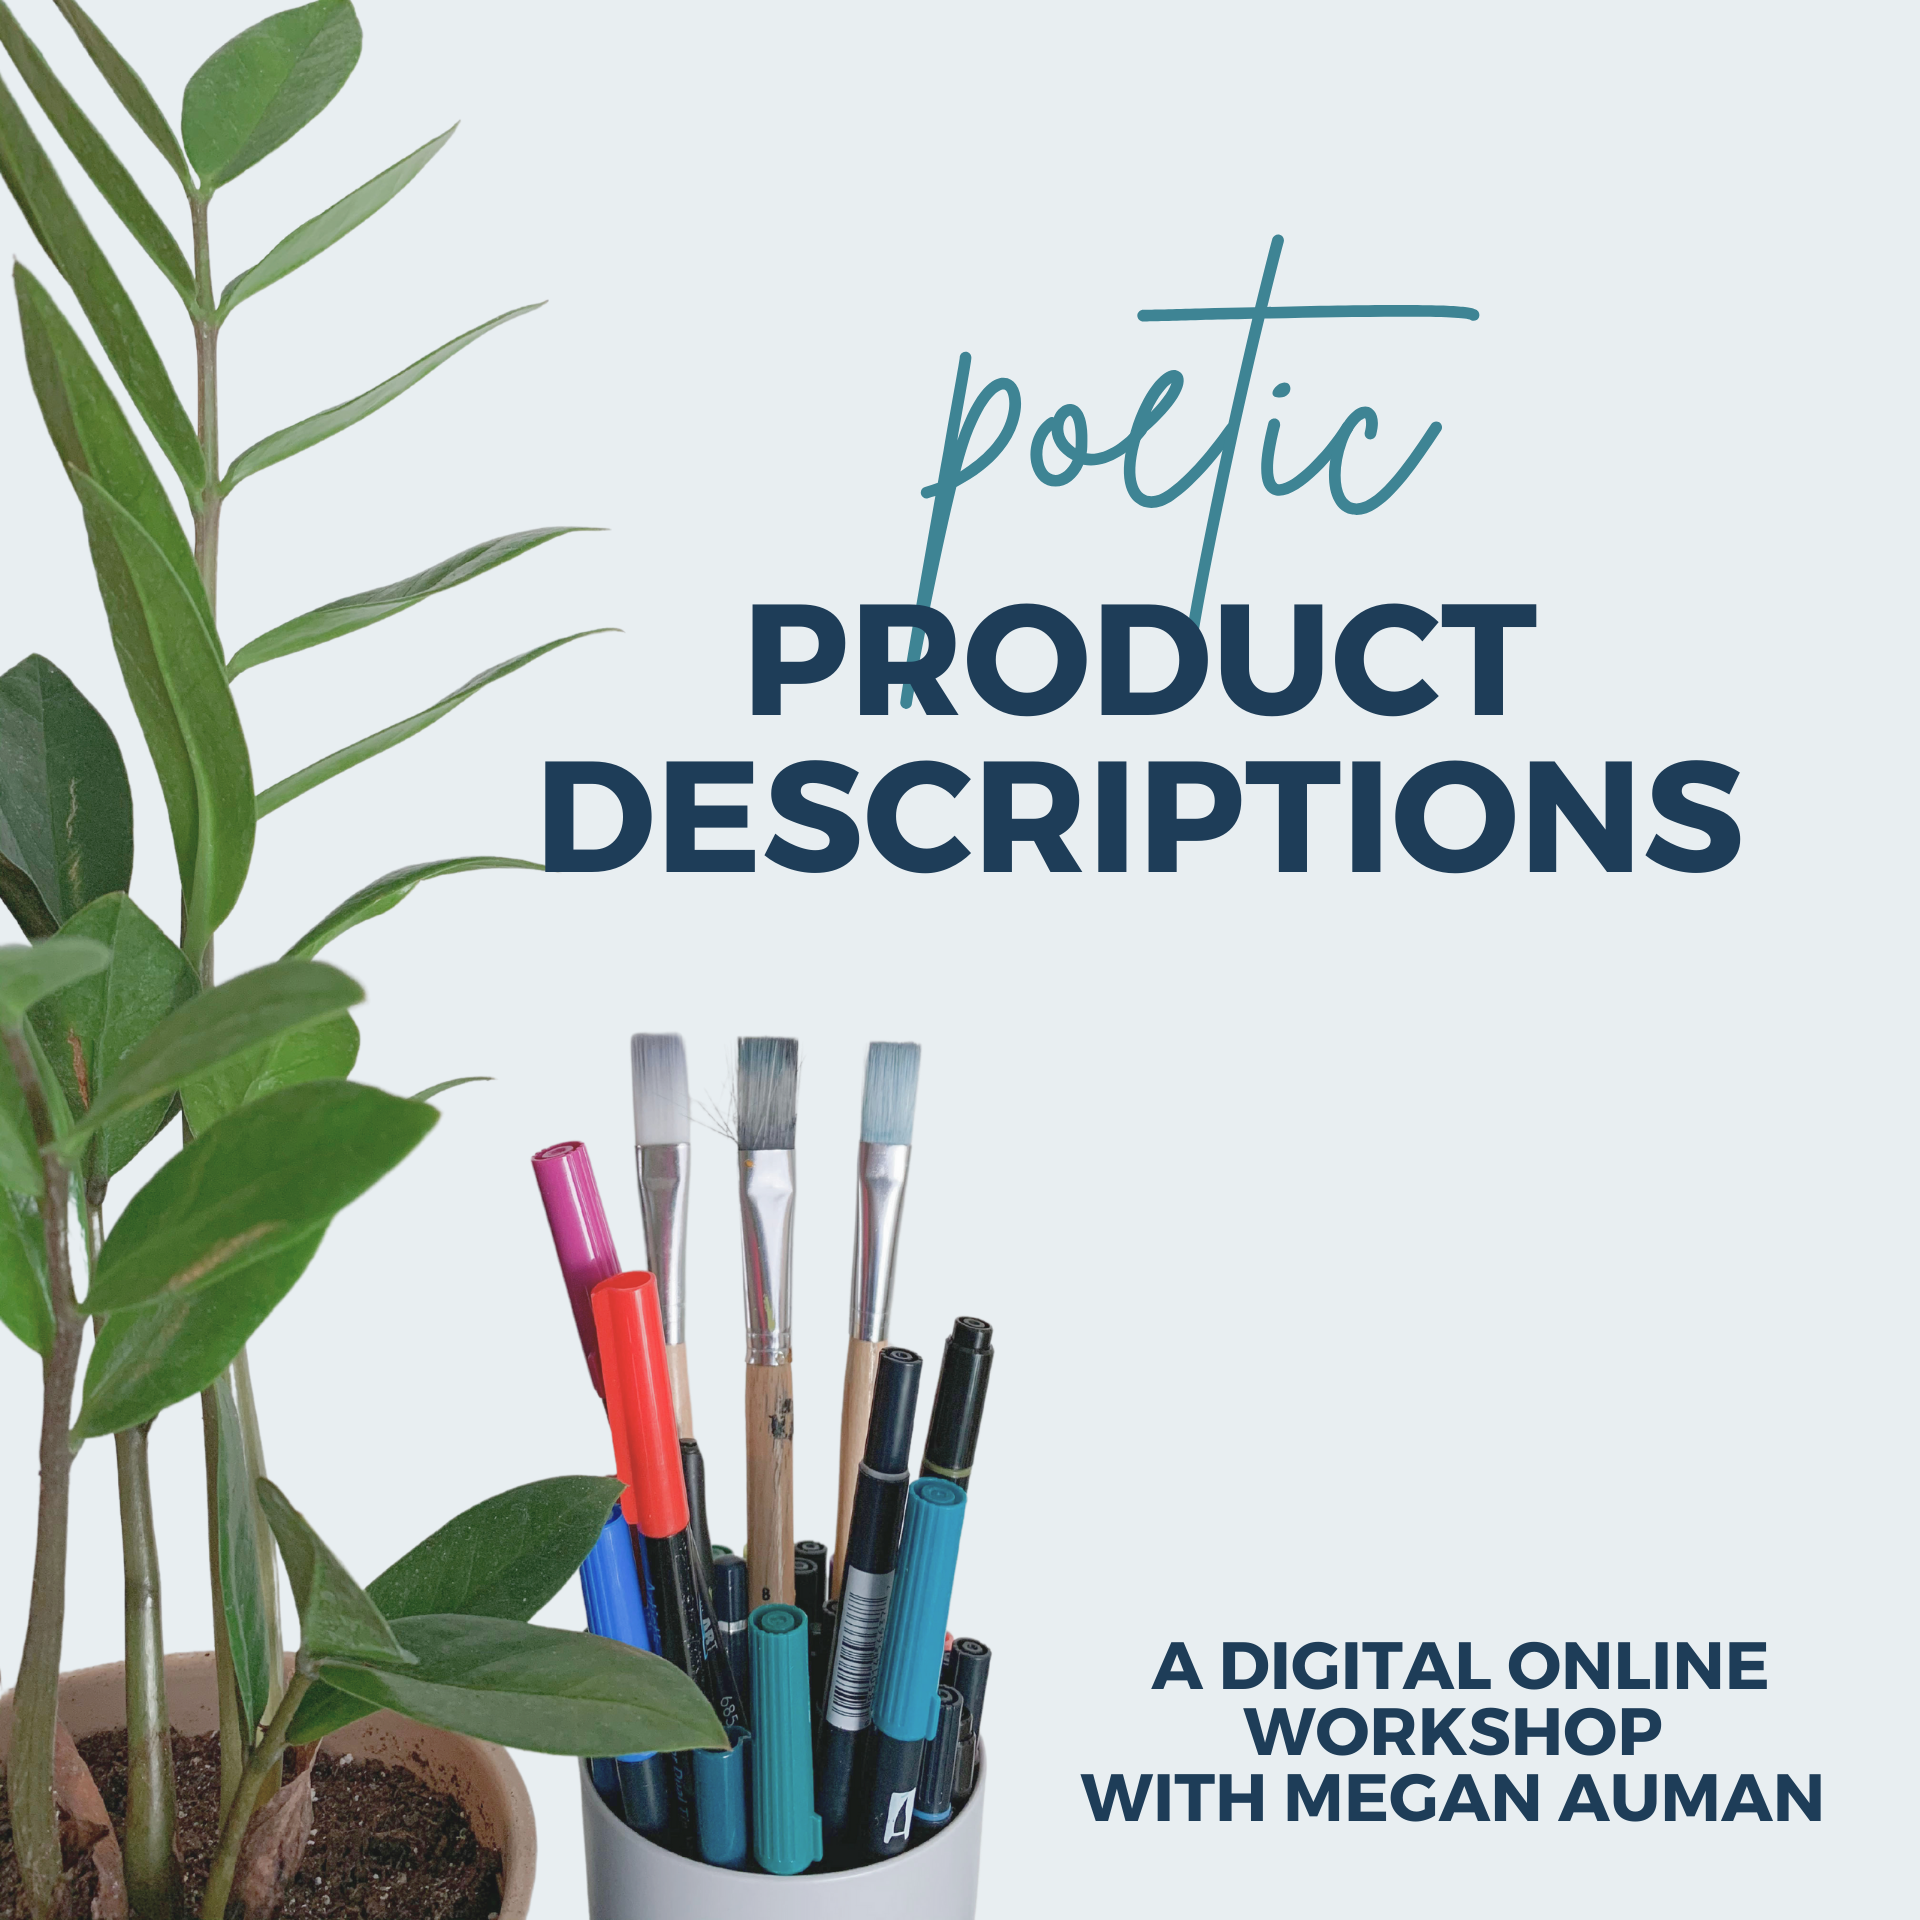 Poetic Product Descriptions Online Workshop with Feedback